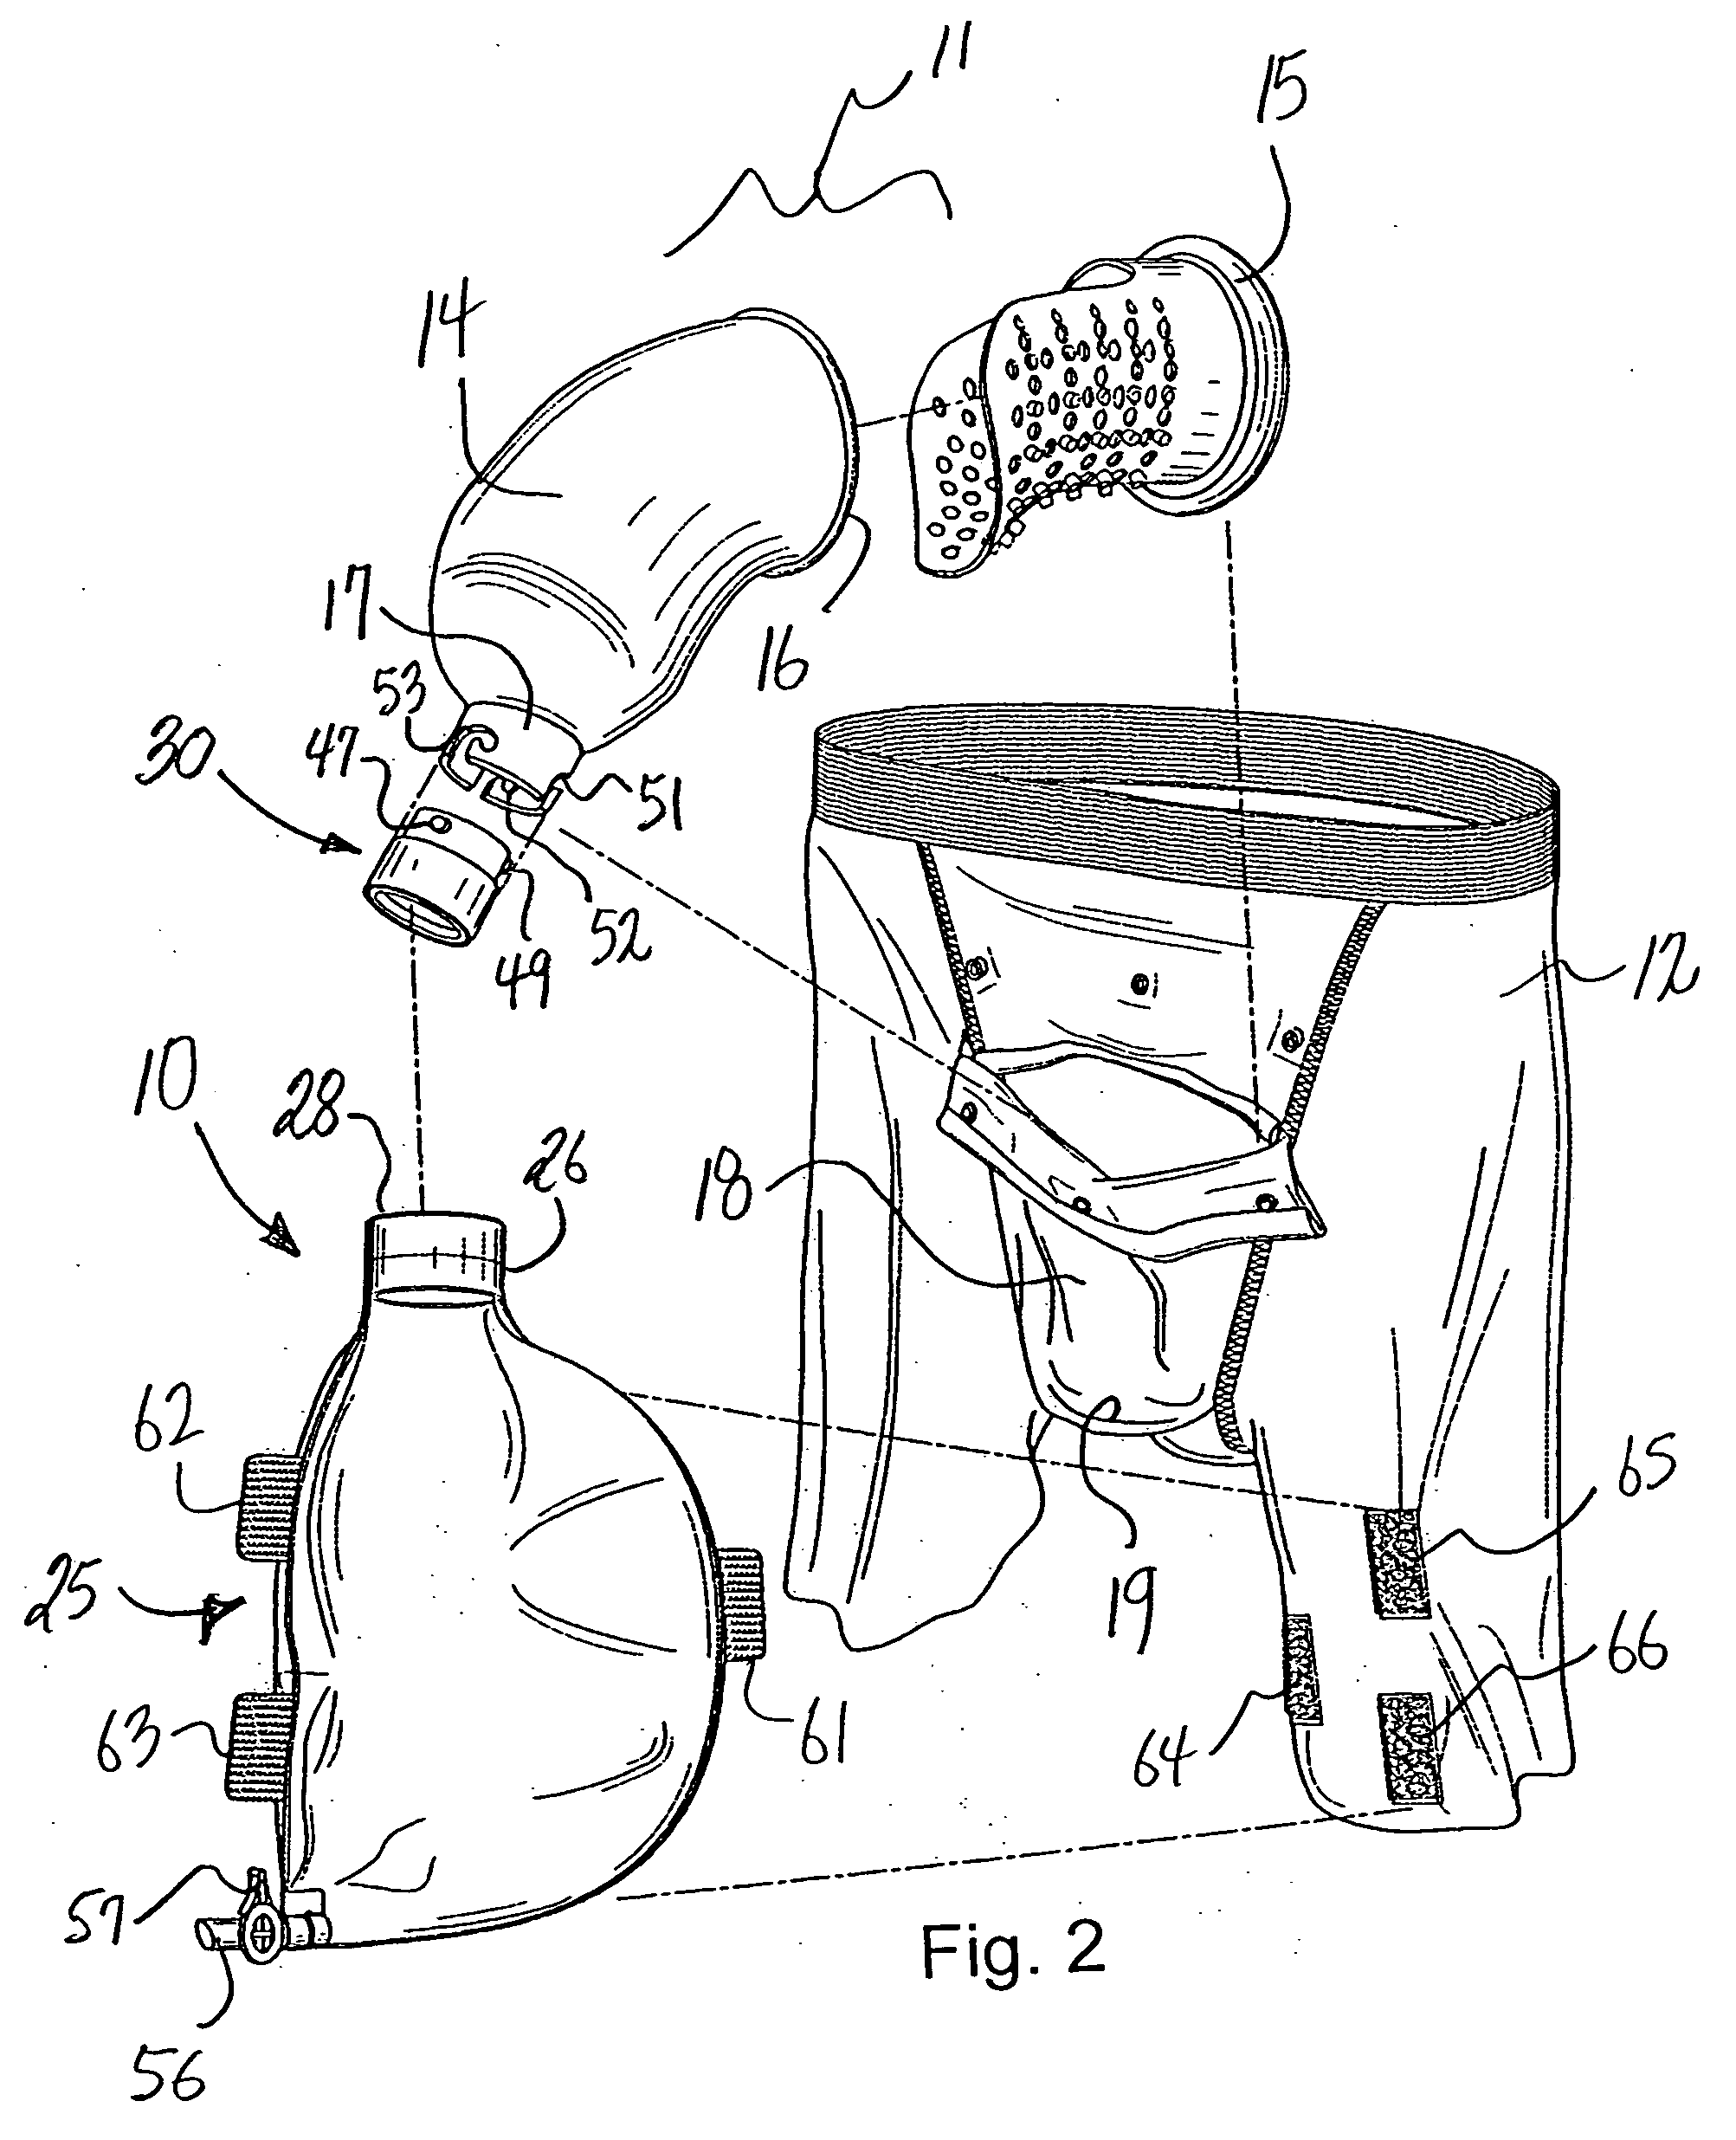 Collection bag adapted for use in an incontinence management system